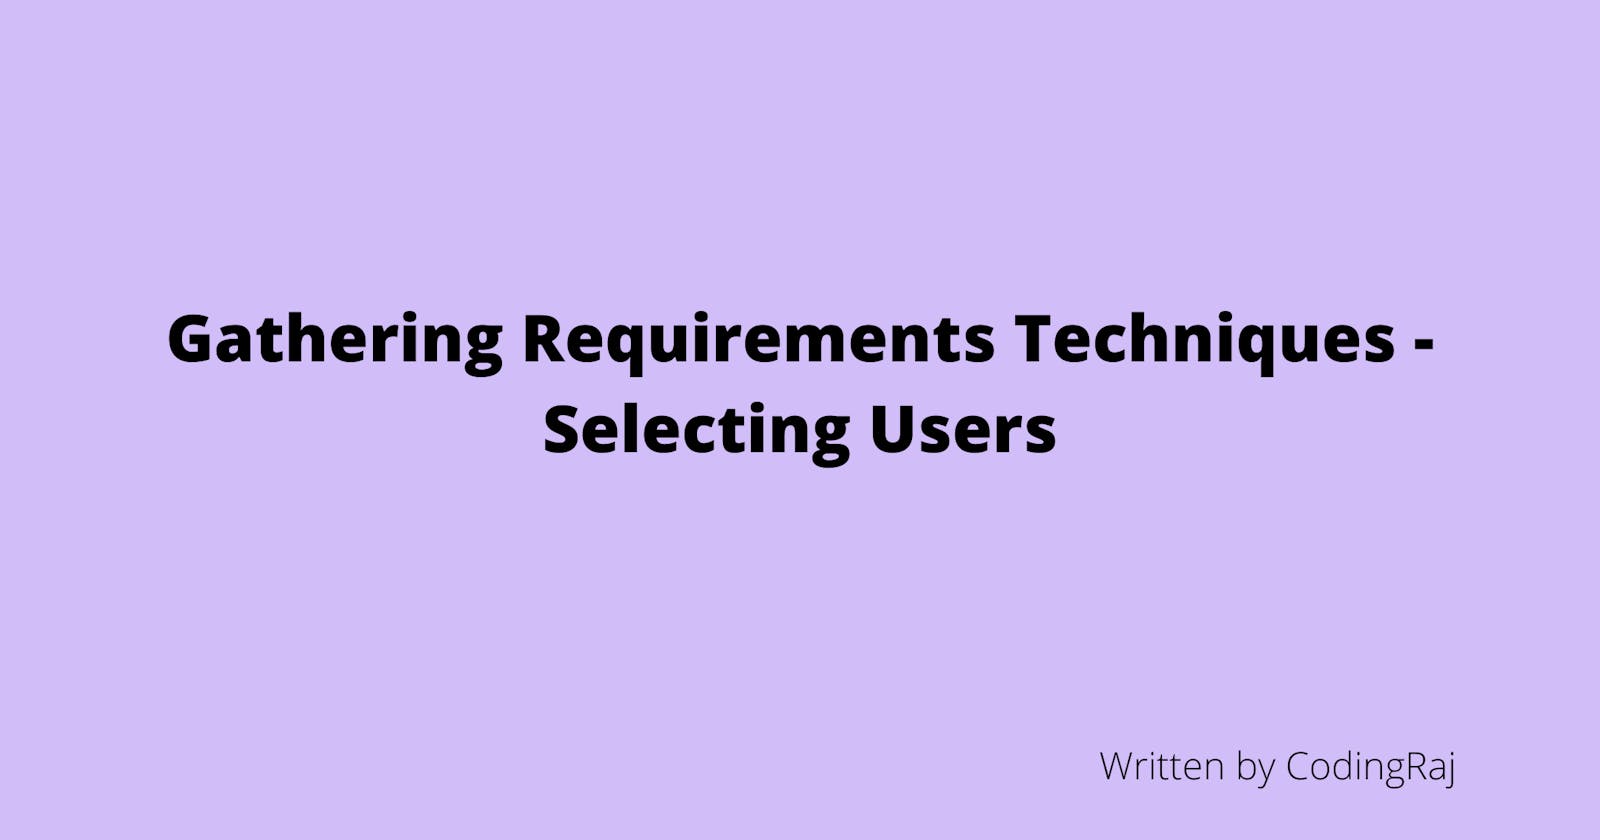 Gathering Requirements Techniques - Selecting Users